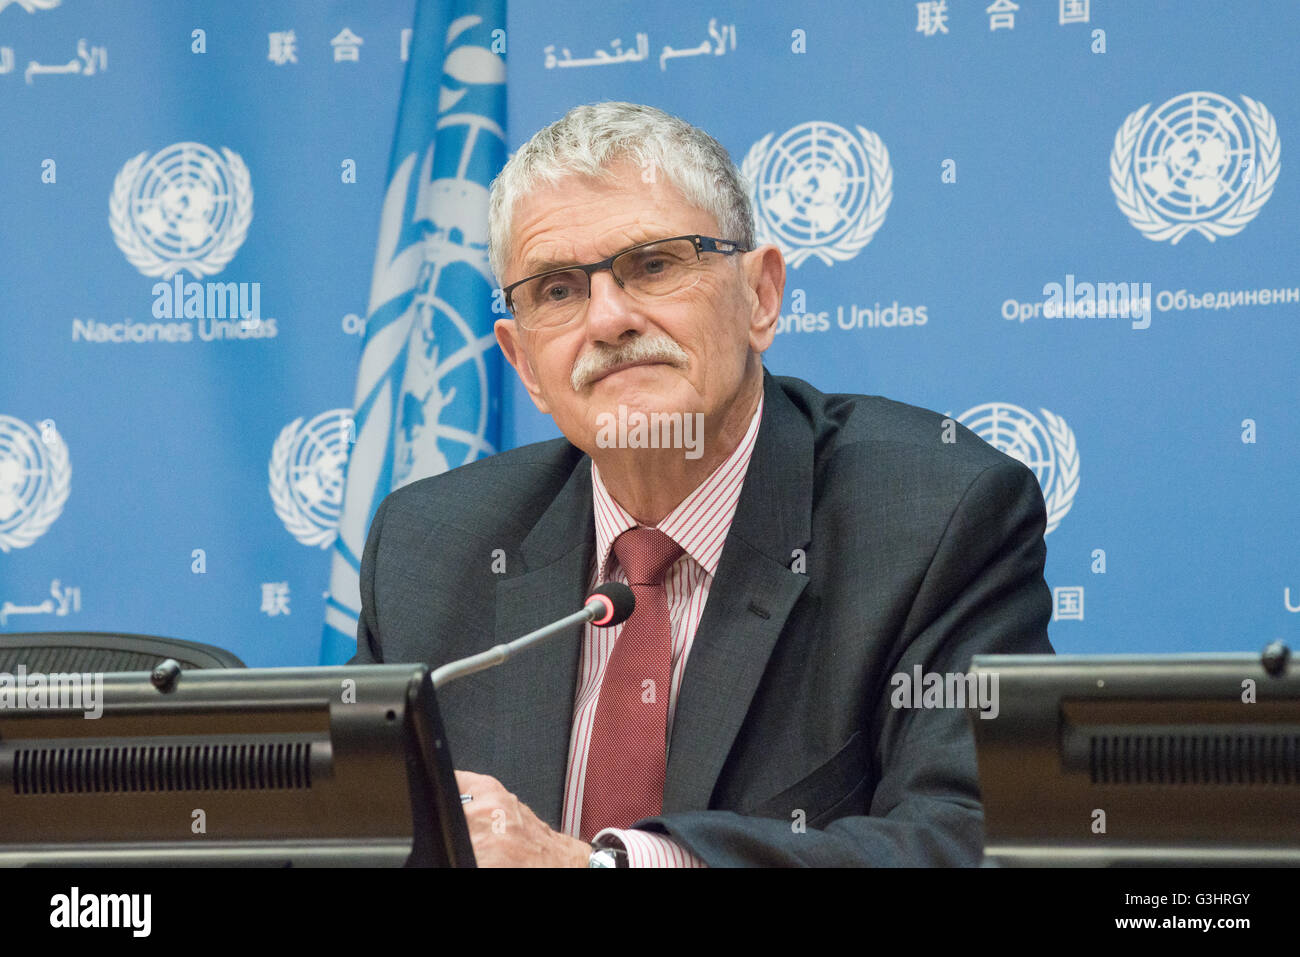 New York, United States. 18th Apr, 2016. General Assembly President Lykketoft speaks to the UN press corps. Mogens Lykketoft, President of the Seventieth session of the United Nations General Aassembly, held a press conference to outline upcoming events pertaining to the signing ceremony for the Global Climate Agreement and the thematic debate on implementation of the Sustainable Development Goals. © Albin Lohr-Jones/Pacific Press/Alamy Live News Stock Photo